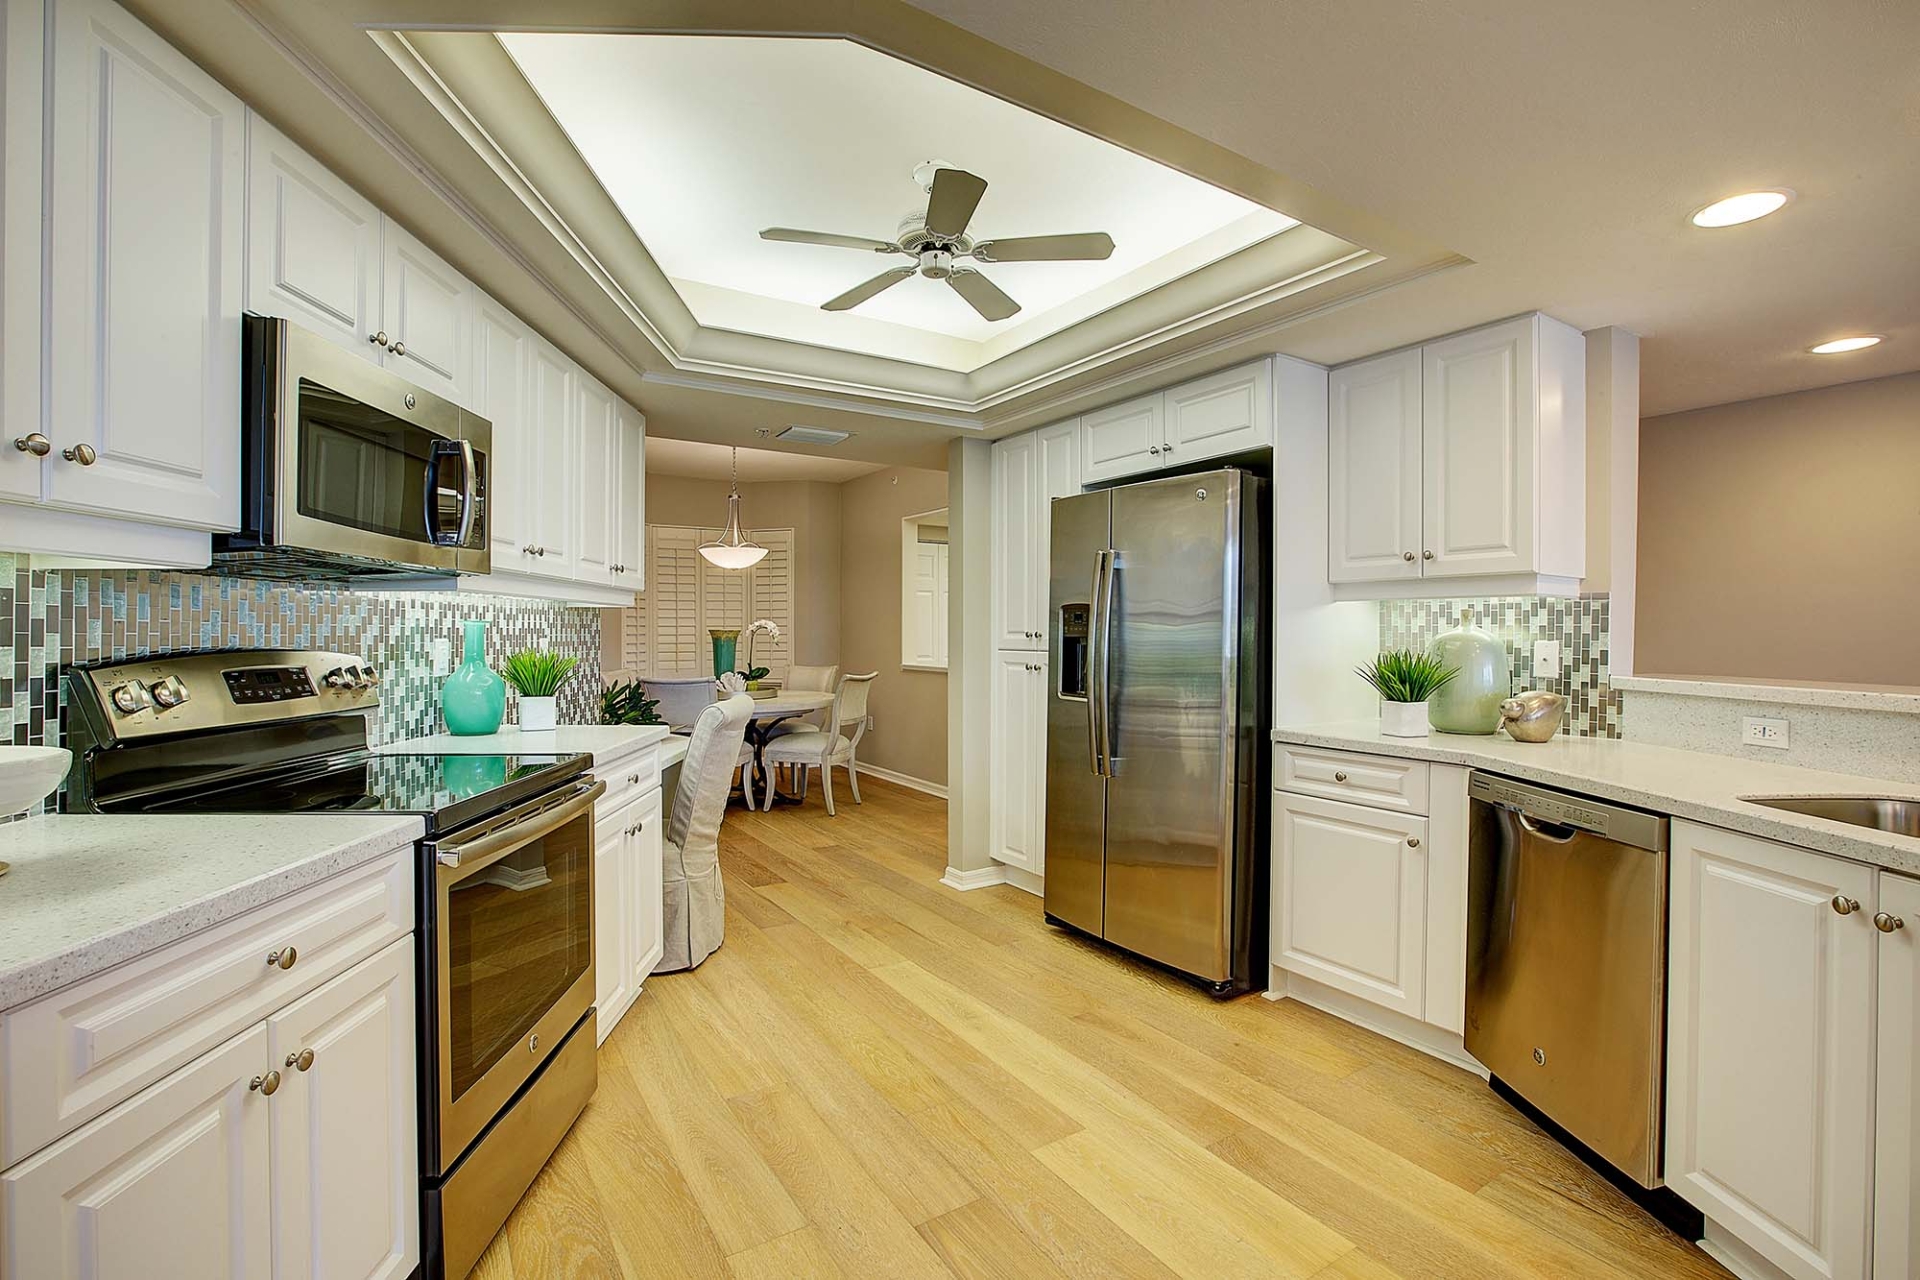 The kitchen at the Oakmont Model Home at Shell Point Retirement Community